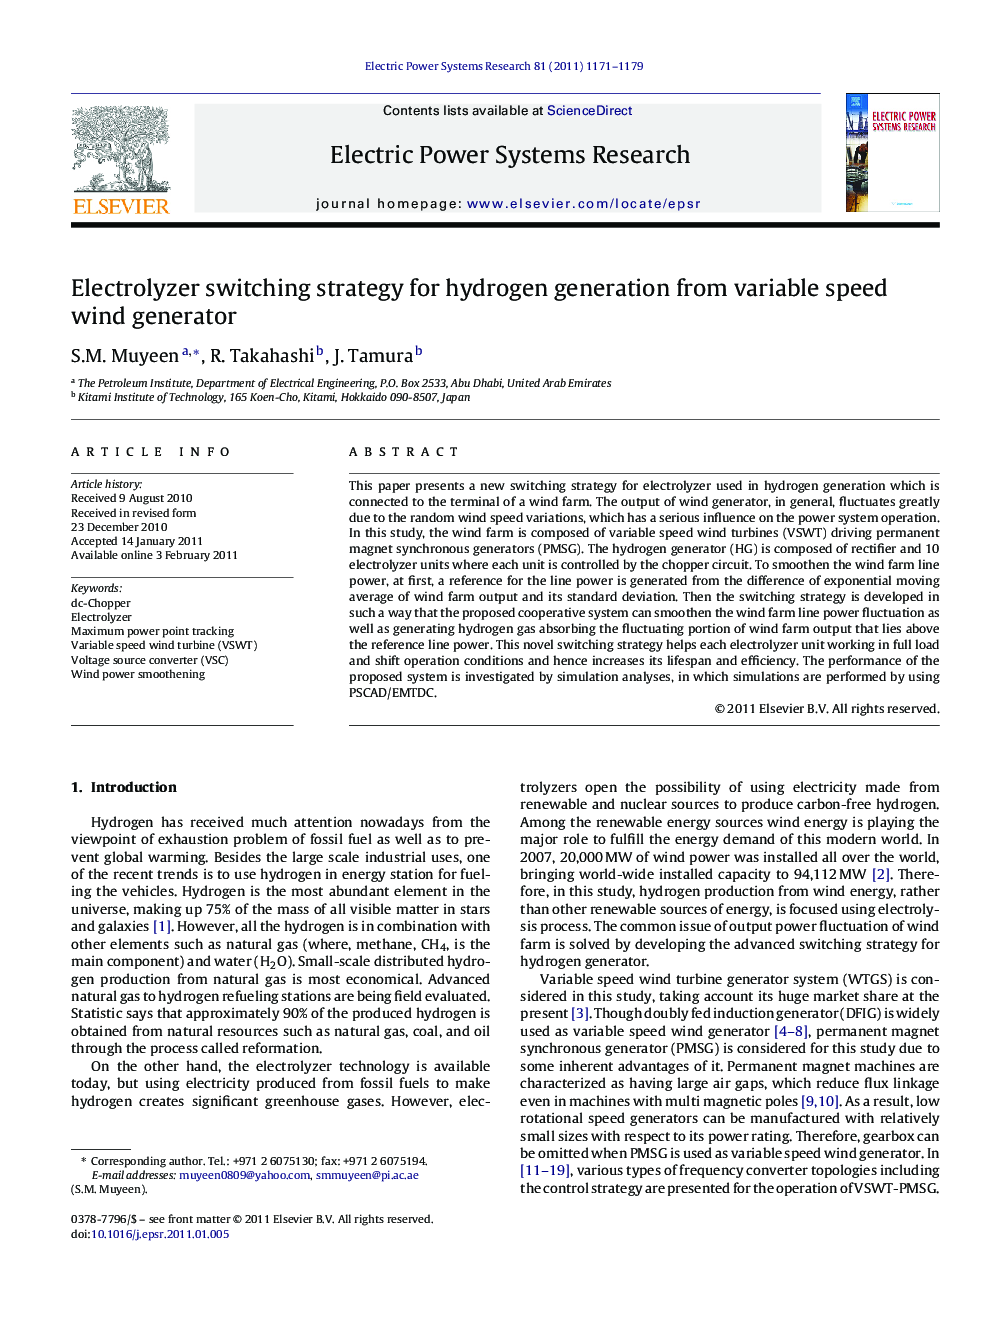 Electrolyzer switching strategy for hydrogen generation from variable speed wind generator